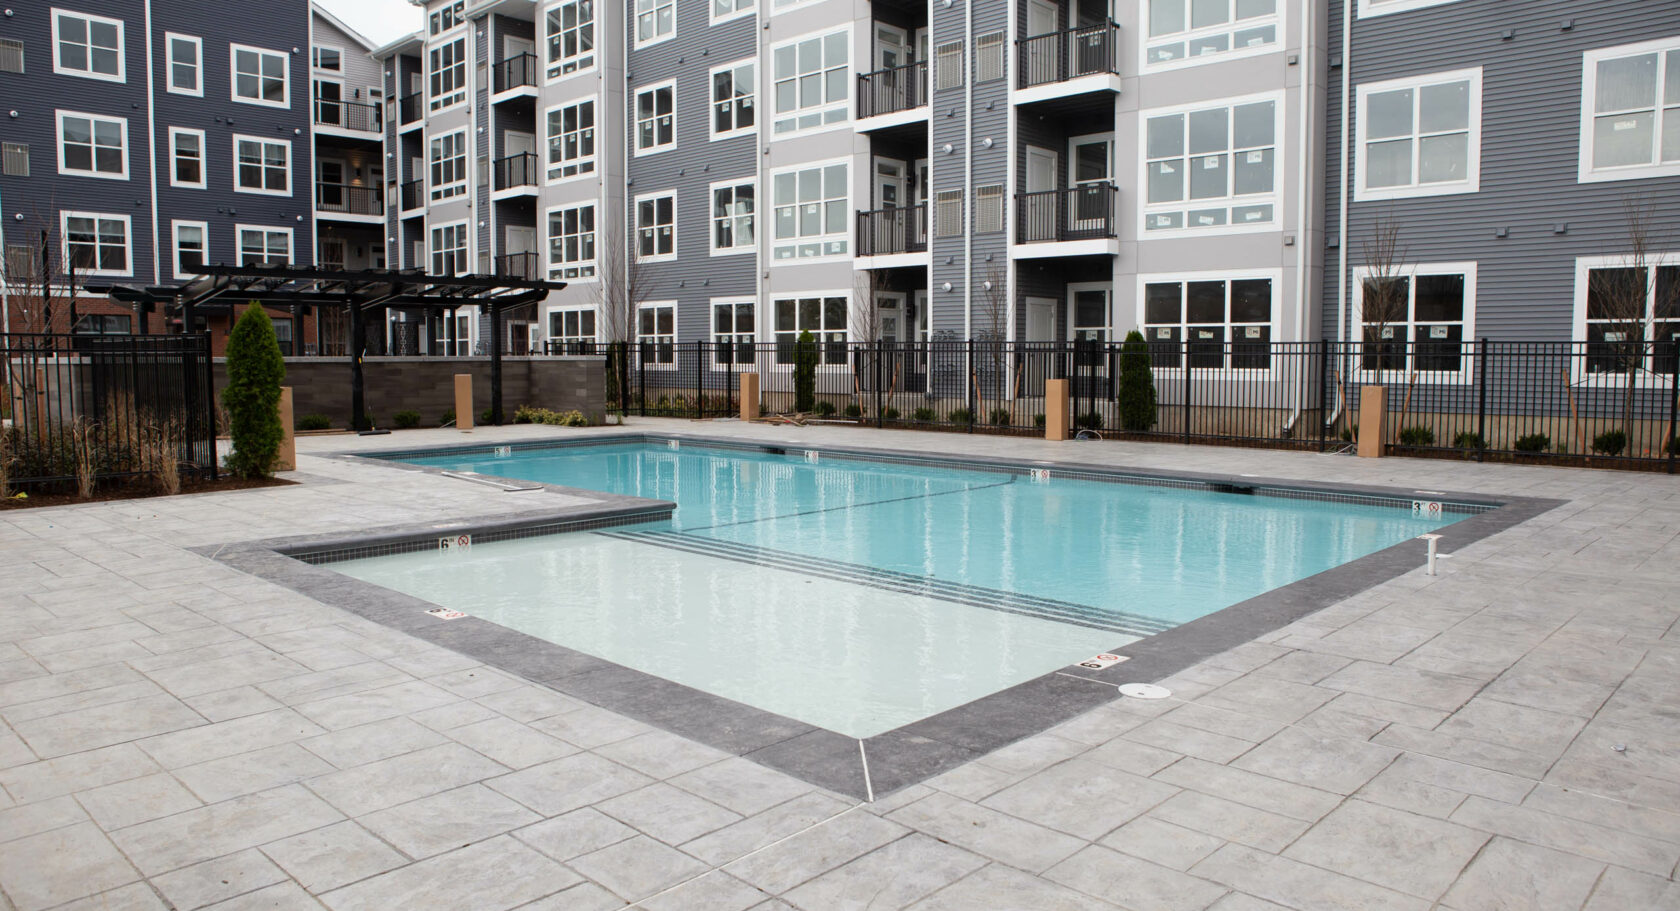 Pool in an apartment complex.